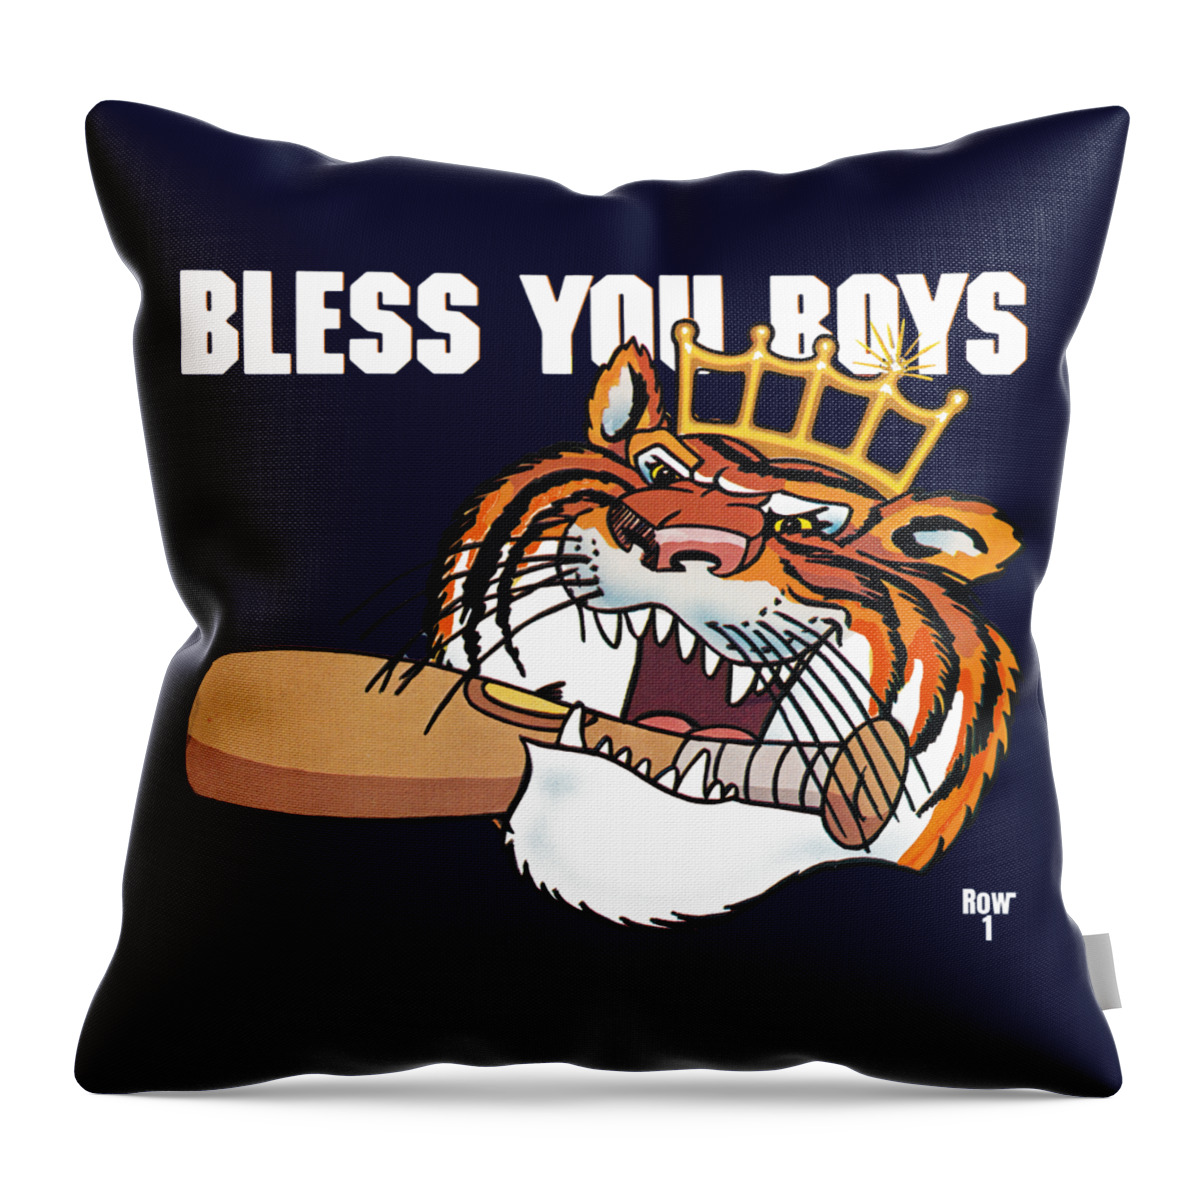 Detroit Throw Pillow featuring the mixed media Bless You Boys Art 1985 by Row One Brand